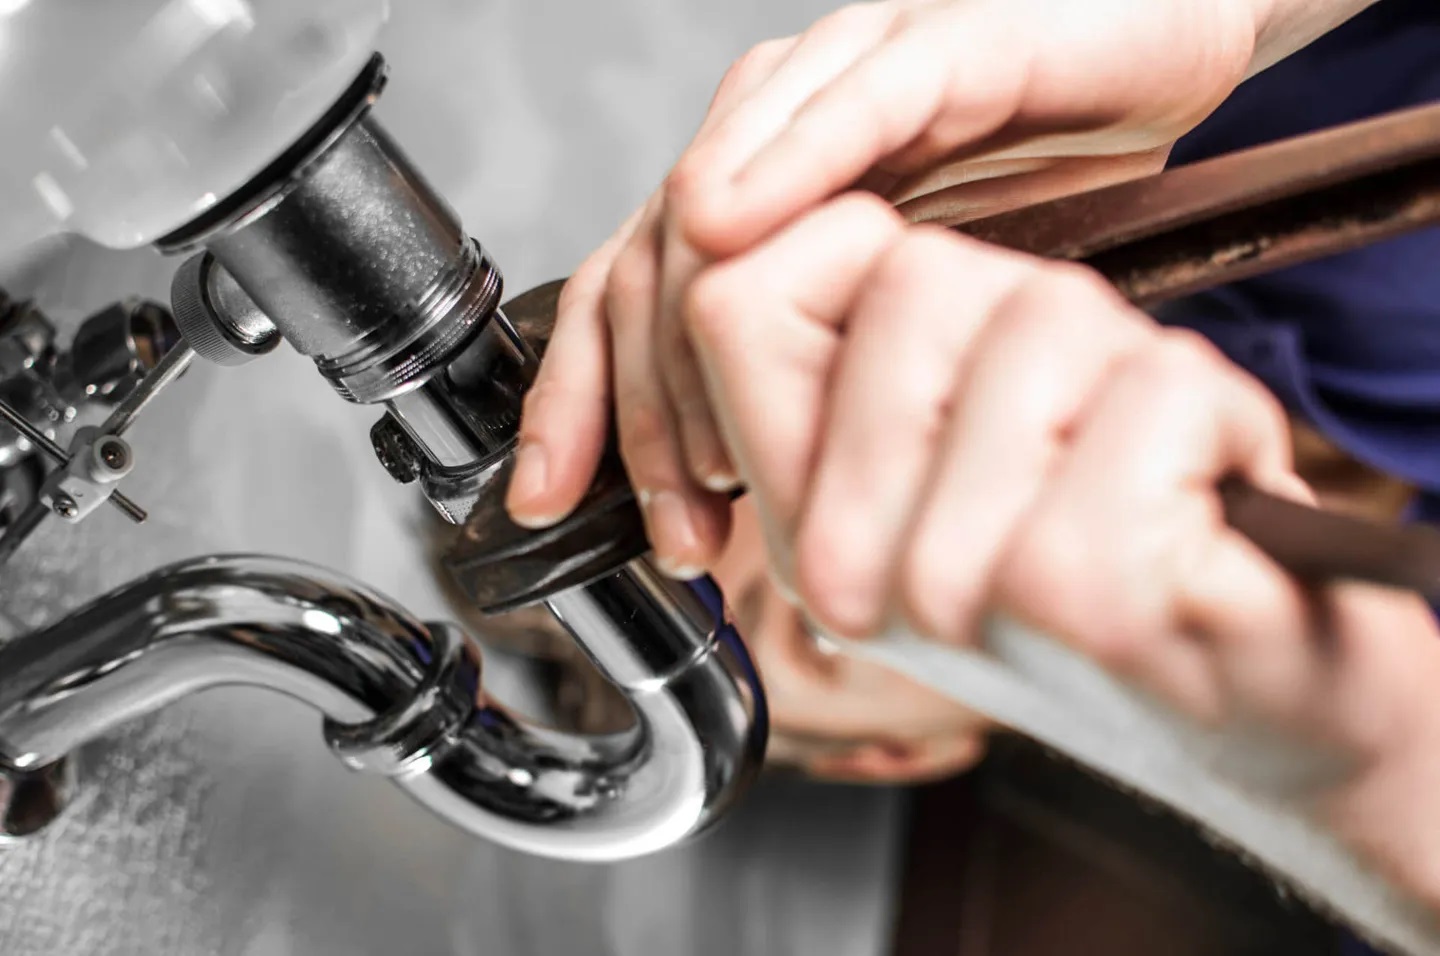 Top Signs You Need to Call a Plumber in Sutton Coldfield